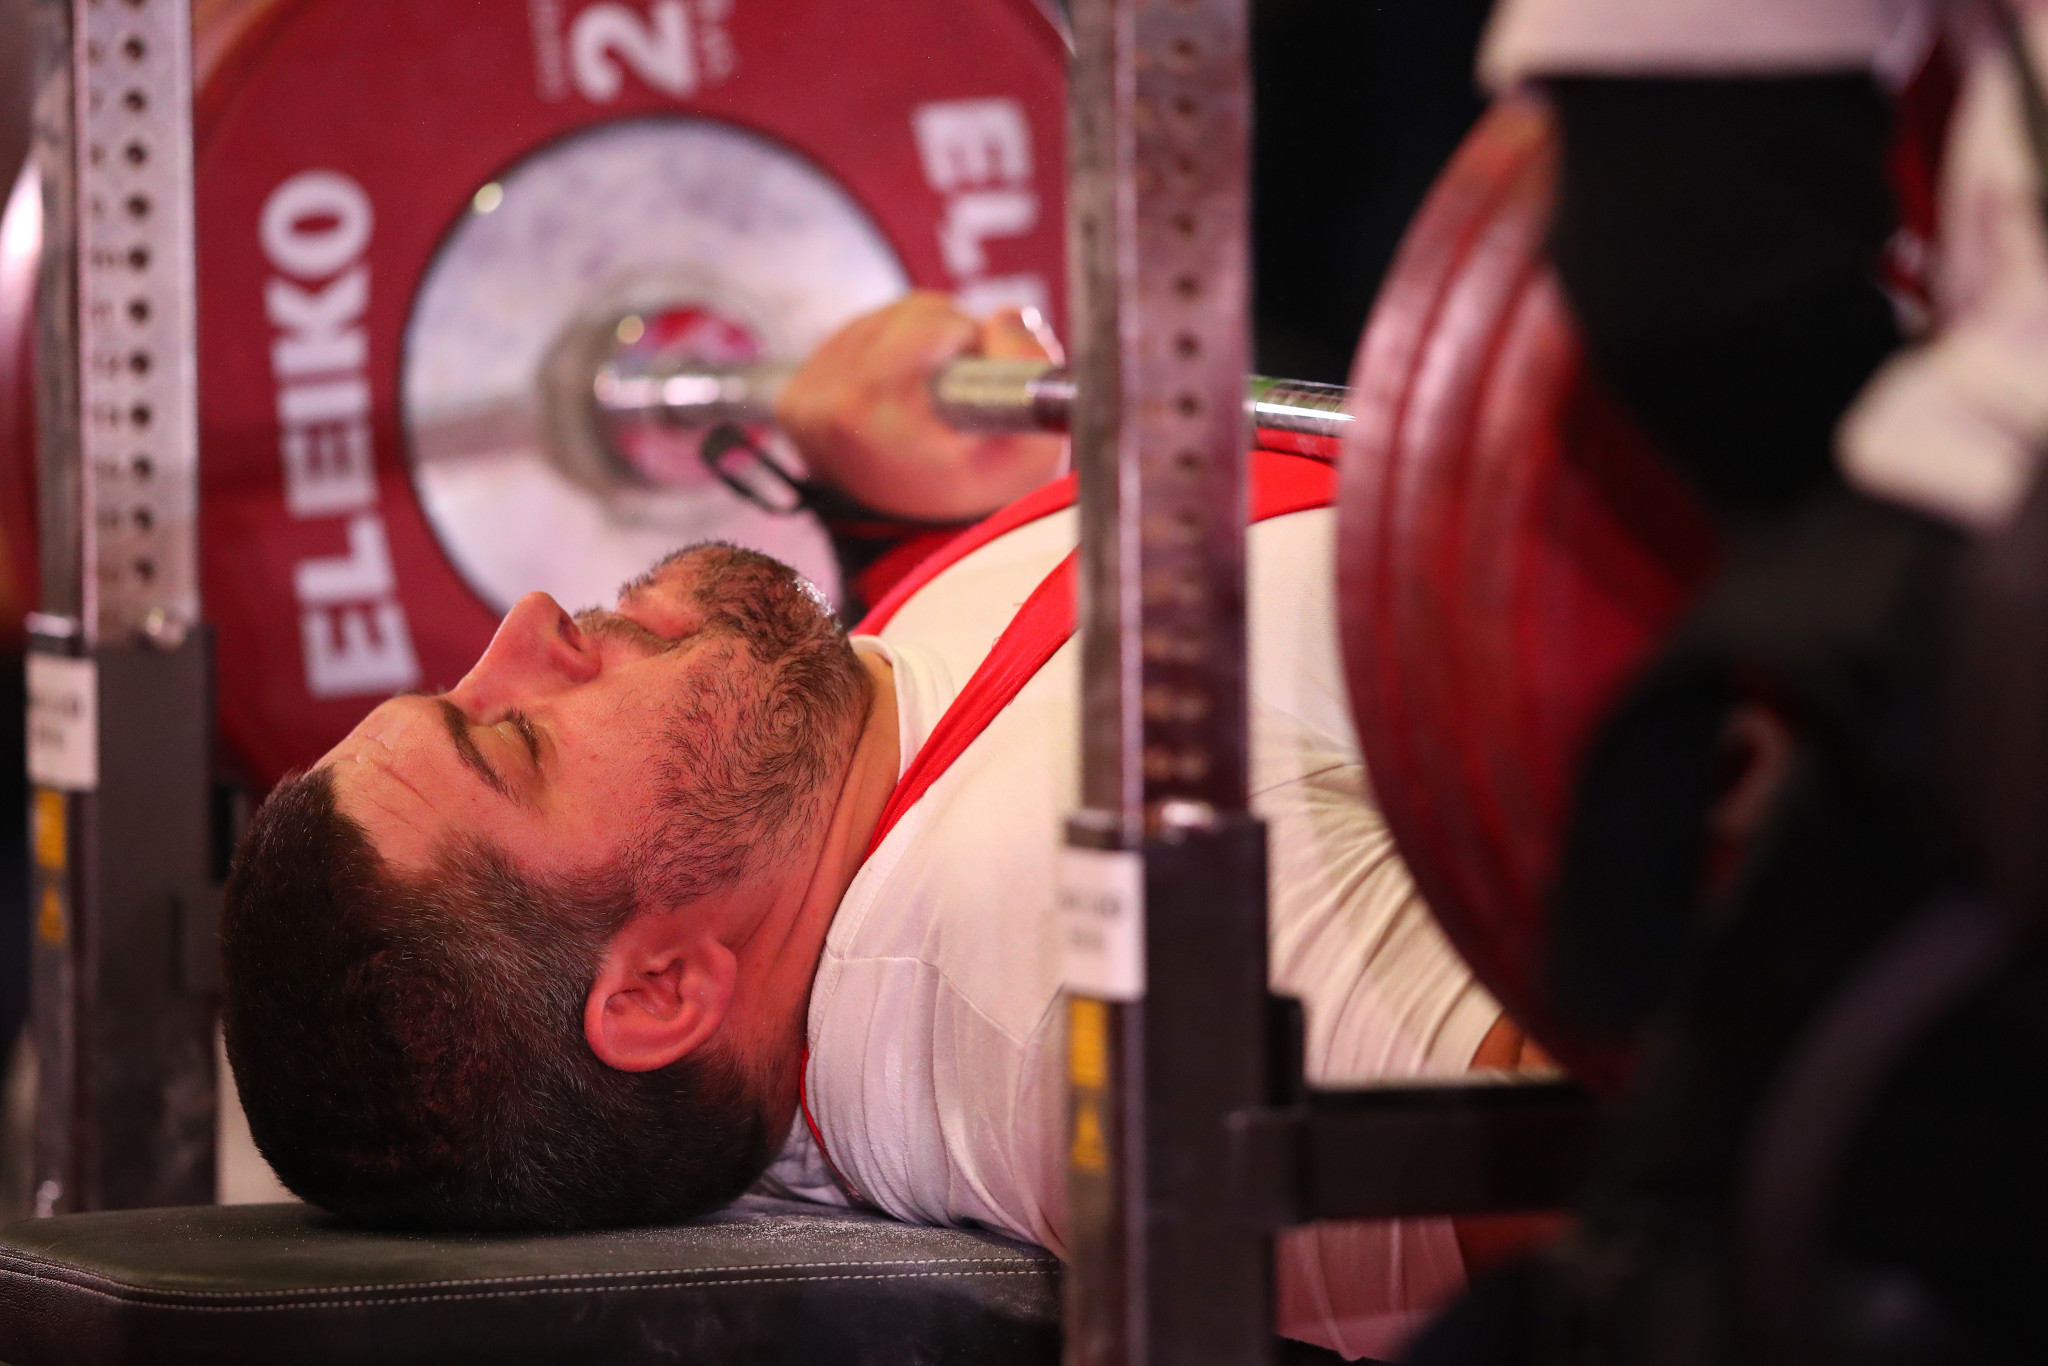 The partnership between World Para Powerlifting and Eleiko began in 2014 ©Getty Images